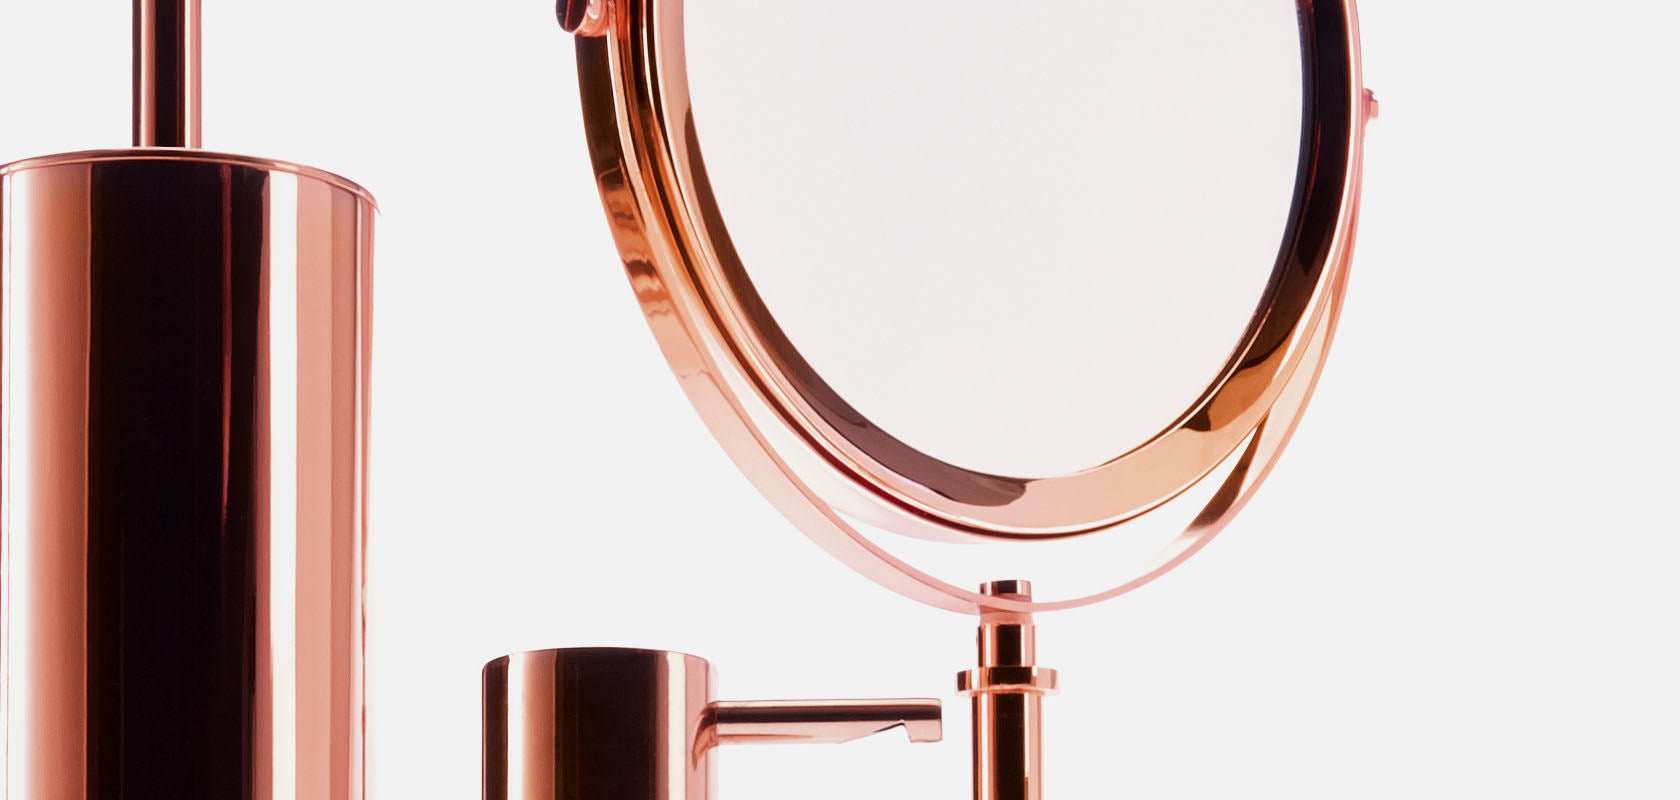 Rose Gold Soap Dispenser by Decor Walther - |VESIMI Design| Luxury Bathrooms and Home Decor